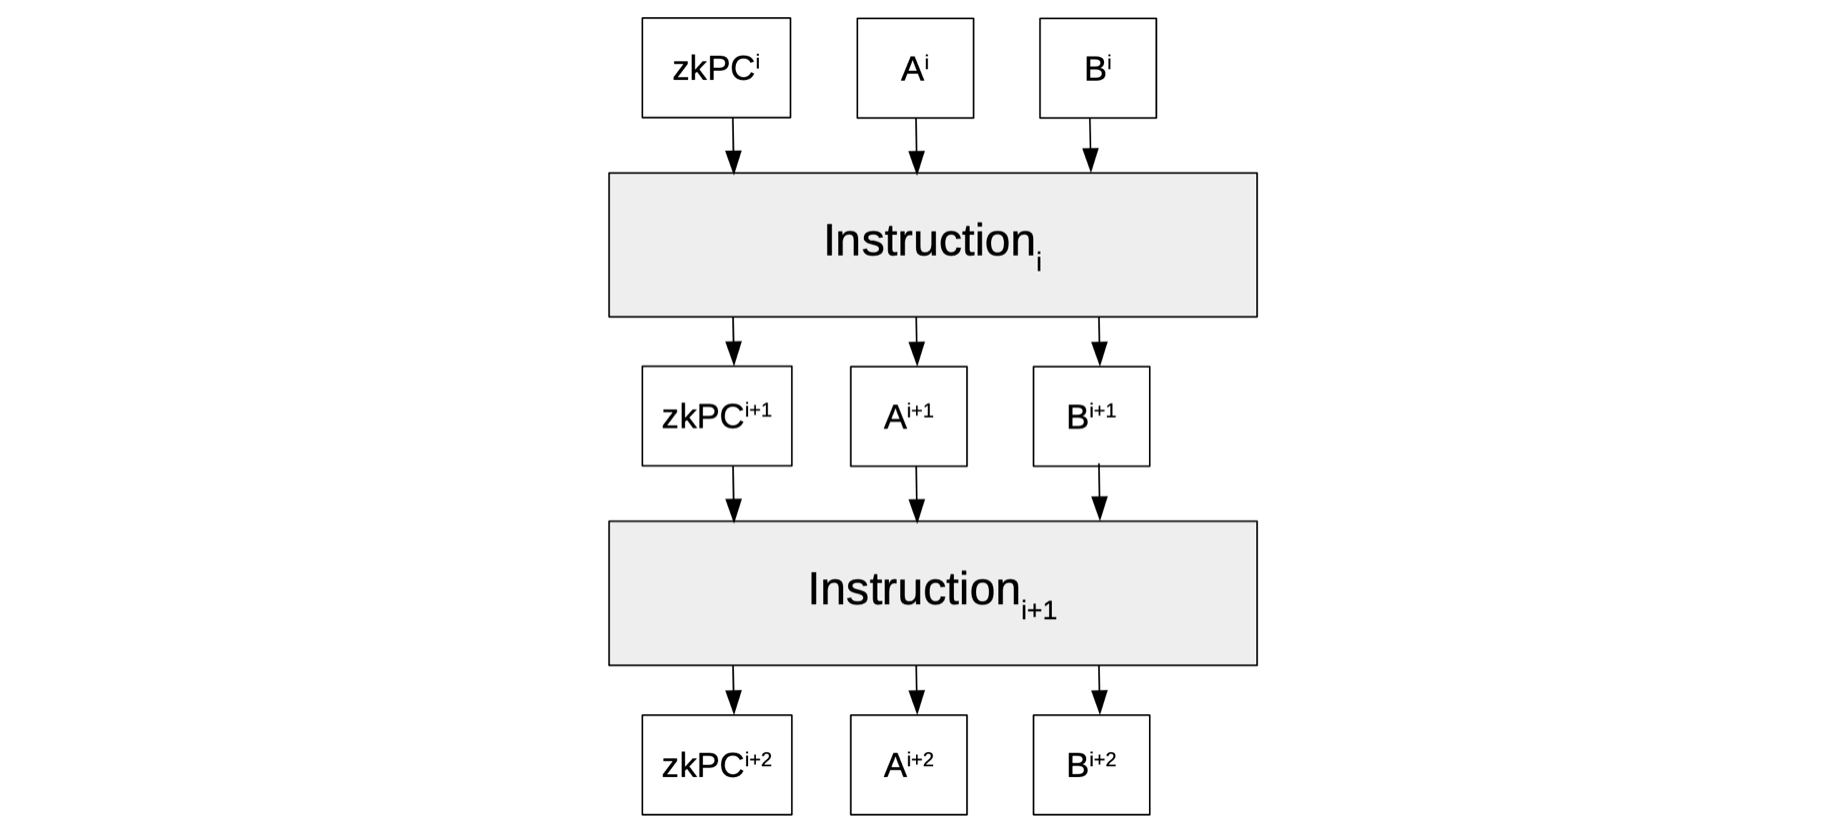 Figure 7: A state machine with a Program Counter